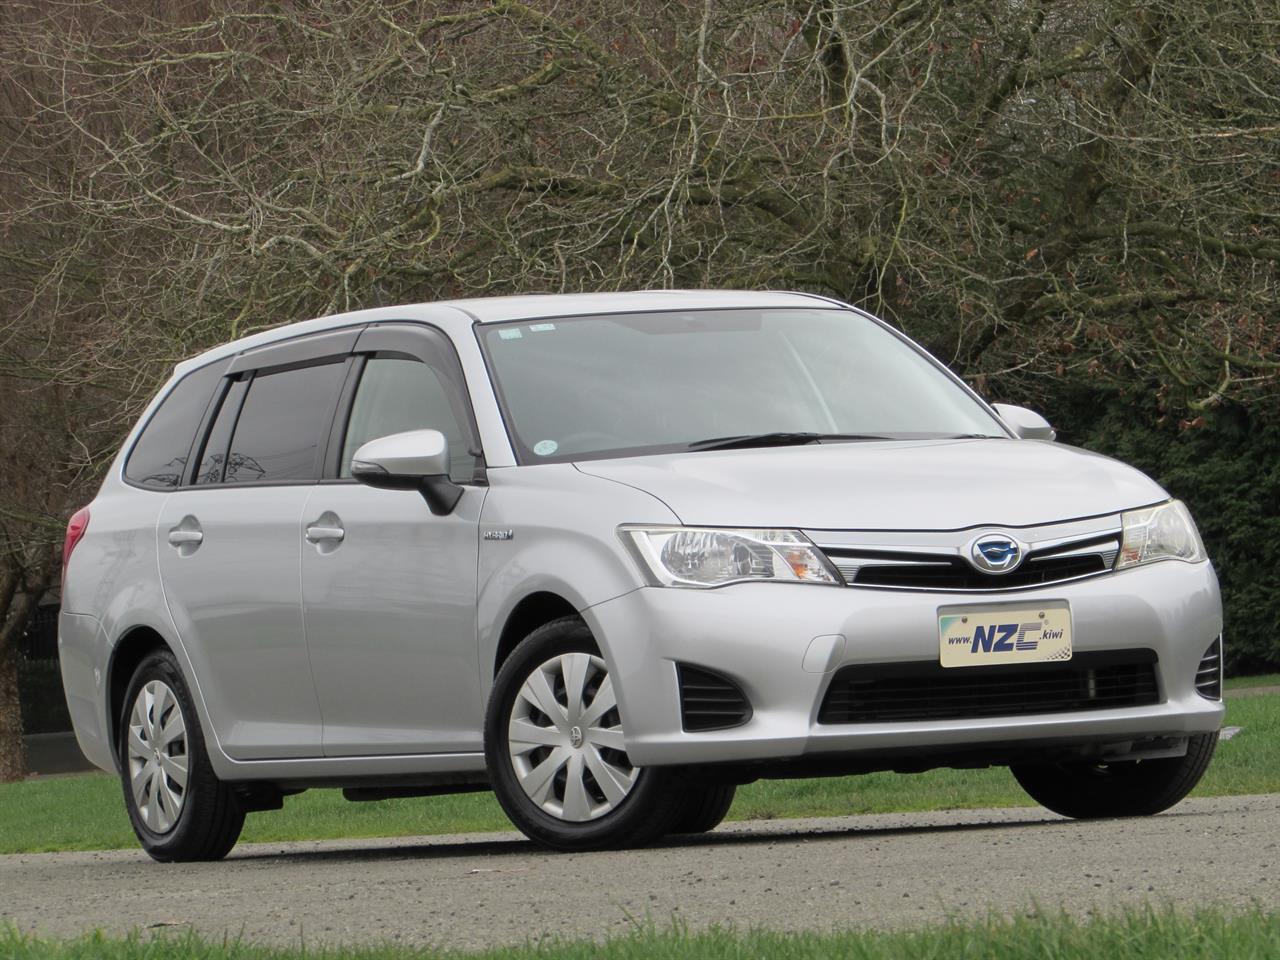 NZC best hot price for 2014 Toyota COROLLA in Christchurch